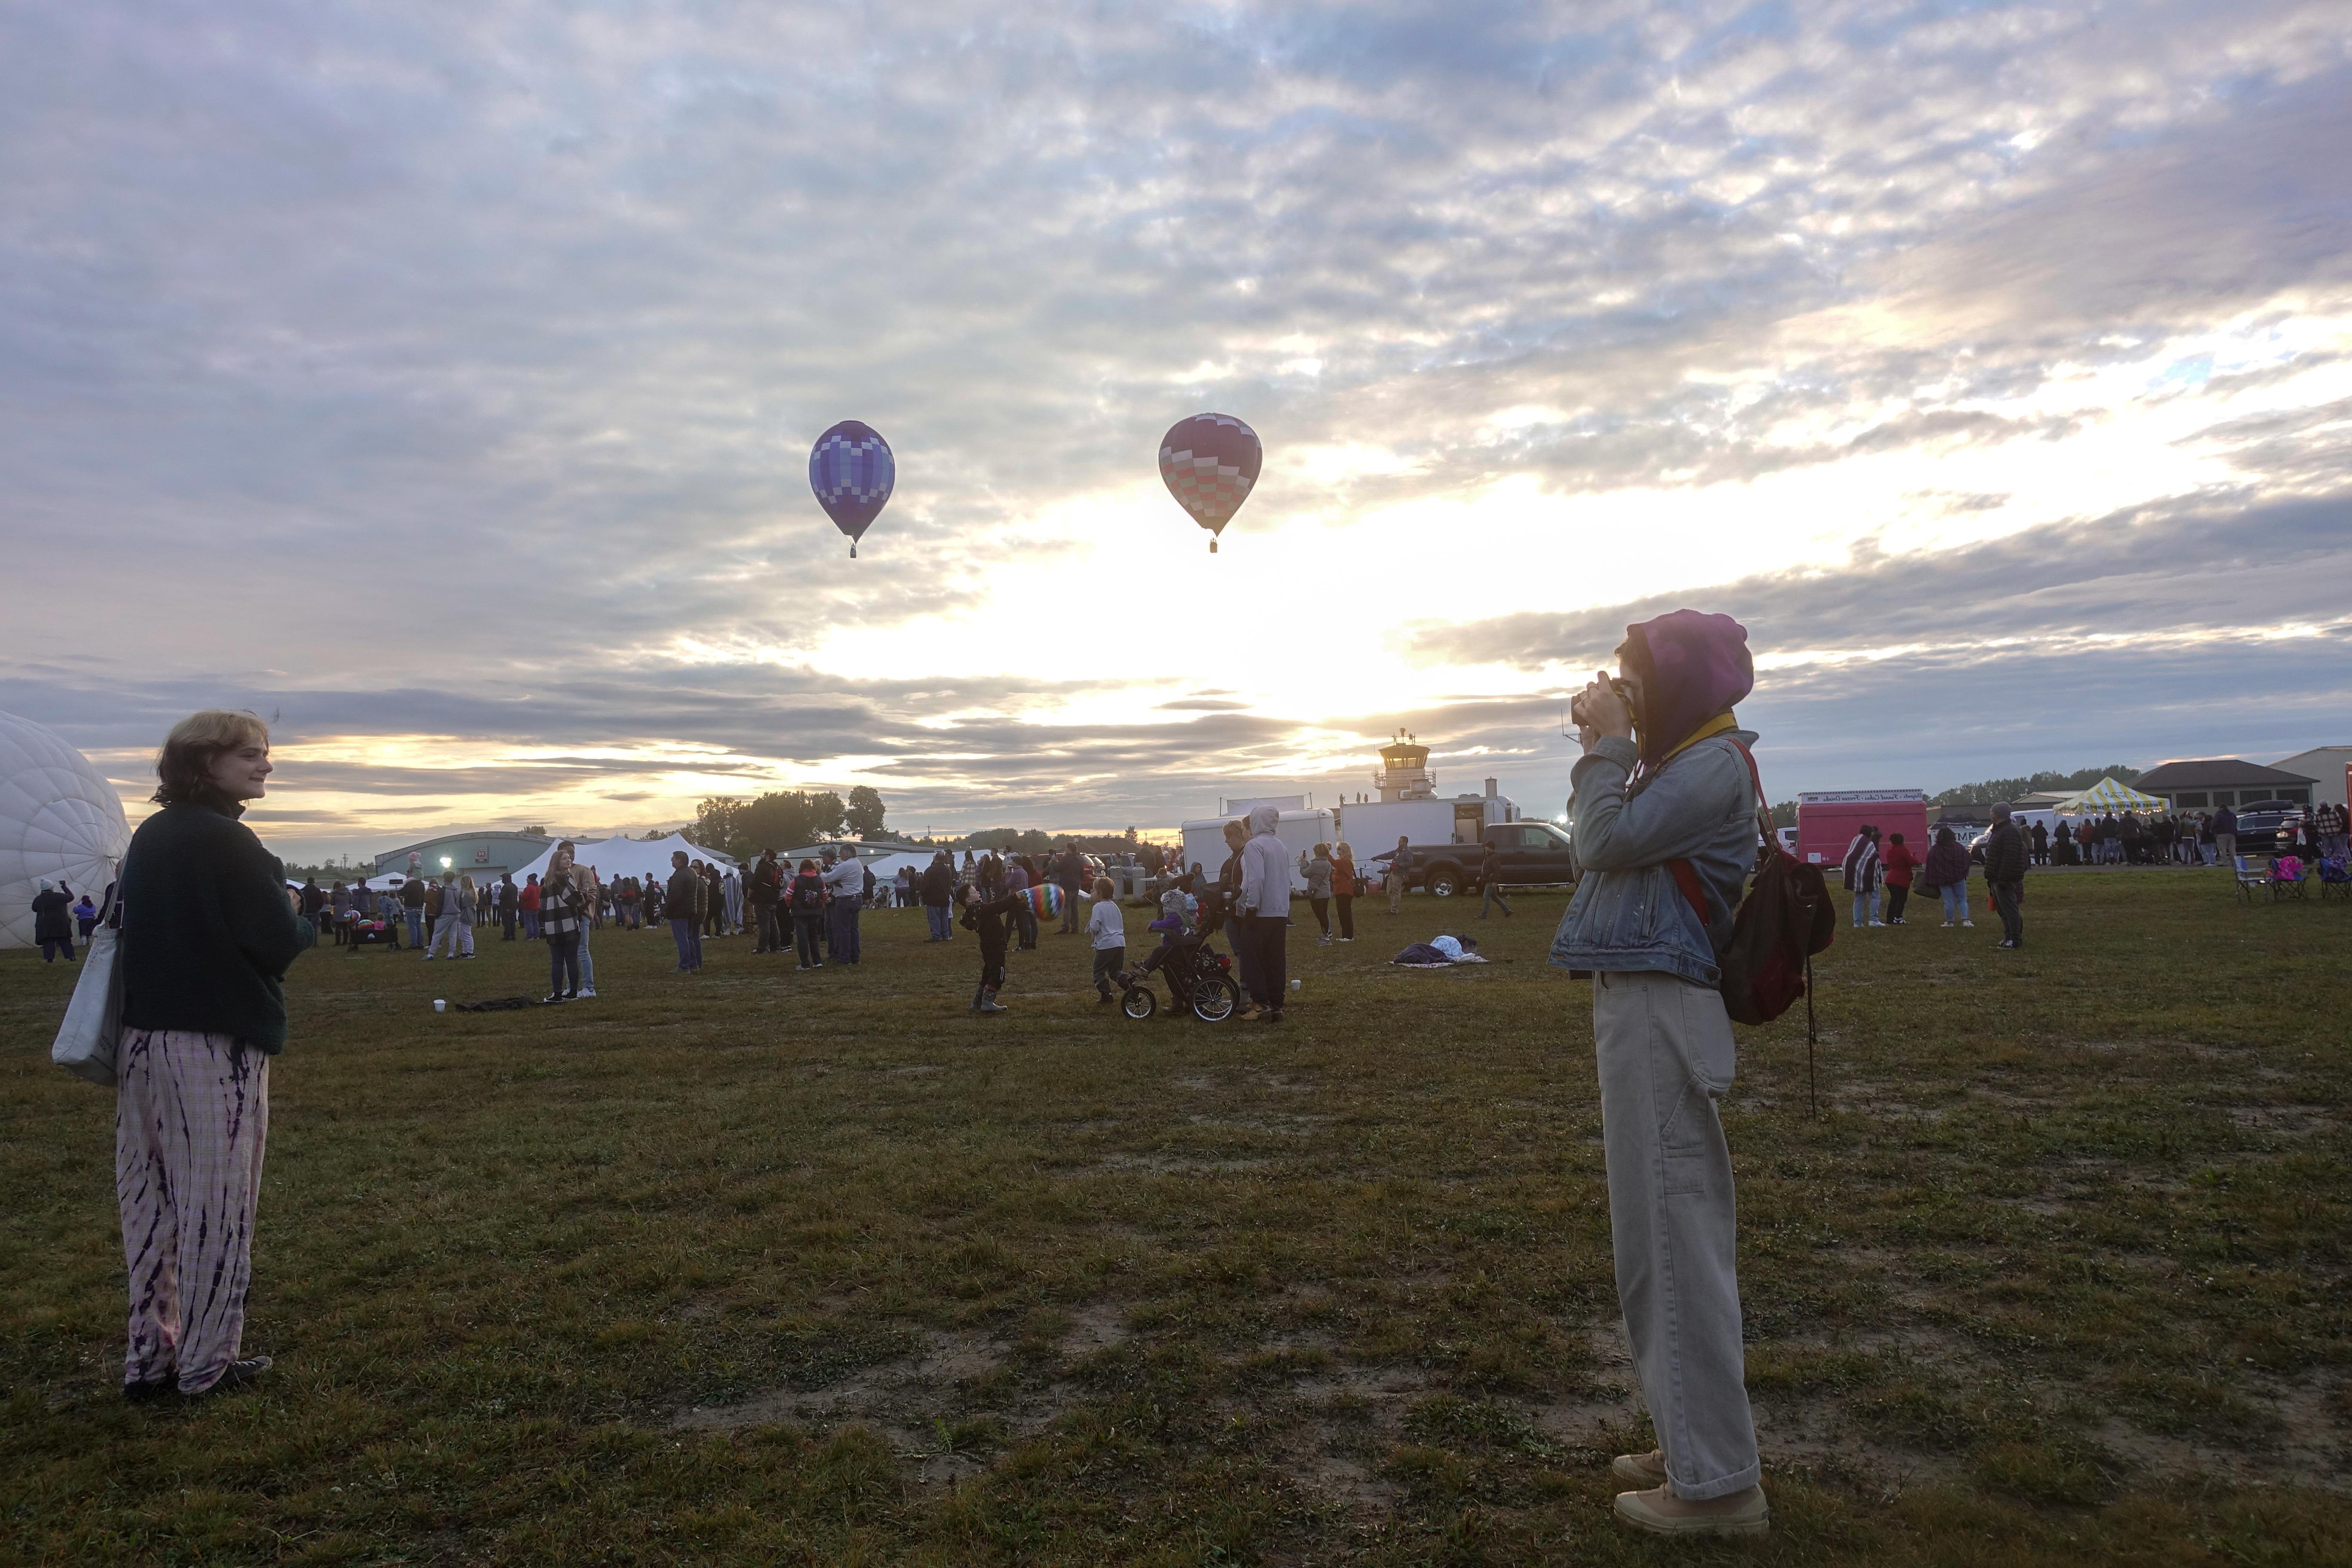 My roommate Renée, left, photographing our friend Cori at the Adirondack Hot Air Balloon Festival.